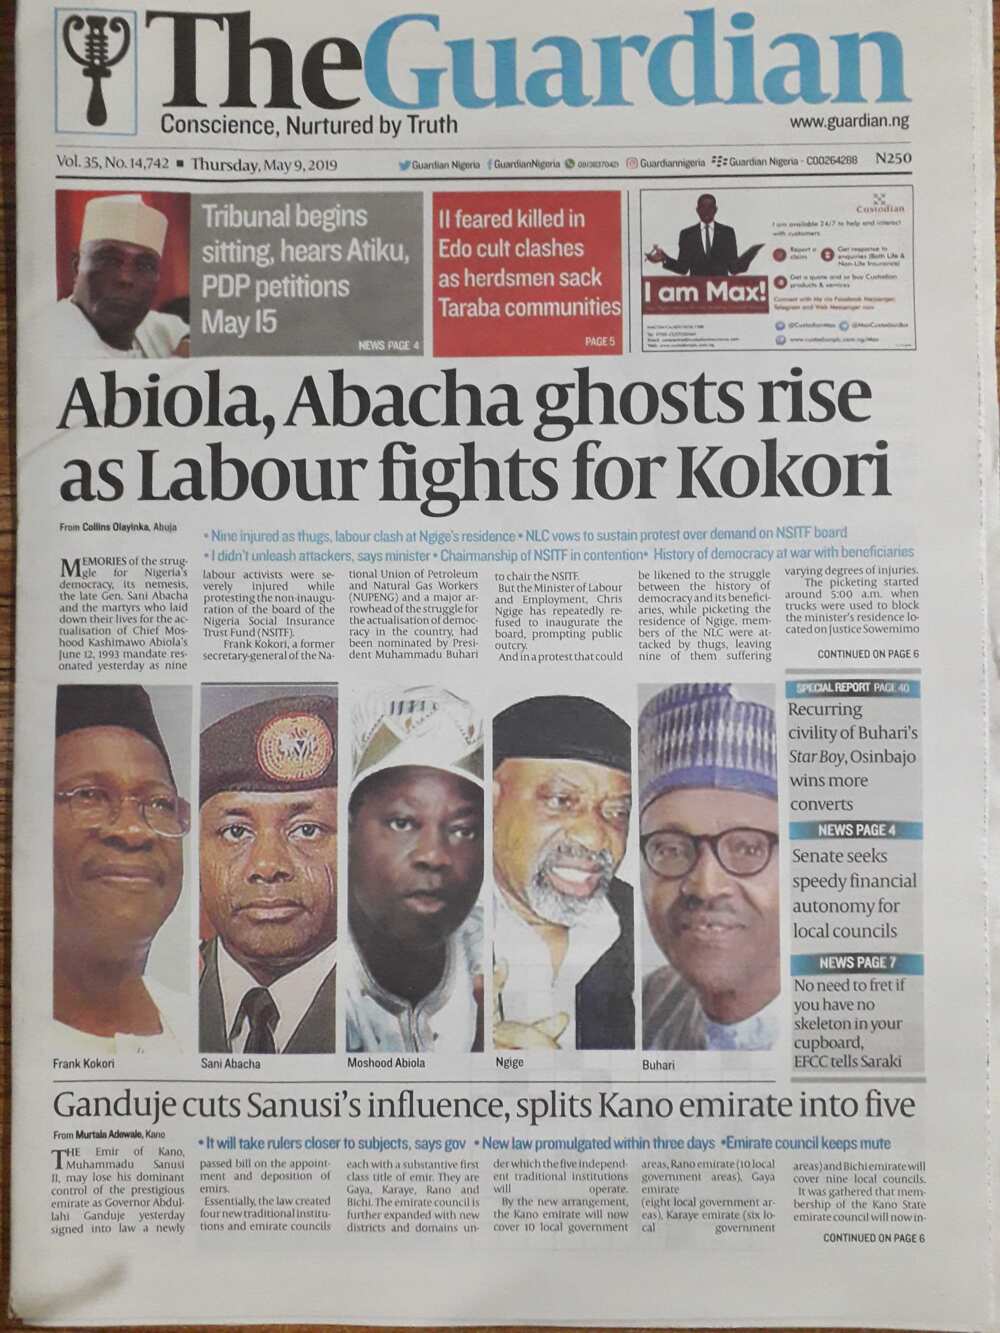 The Guardian newspaper of May 9